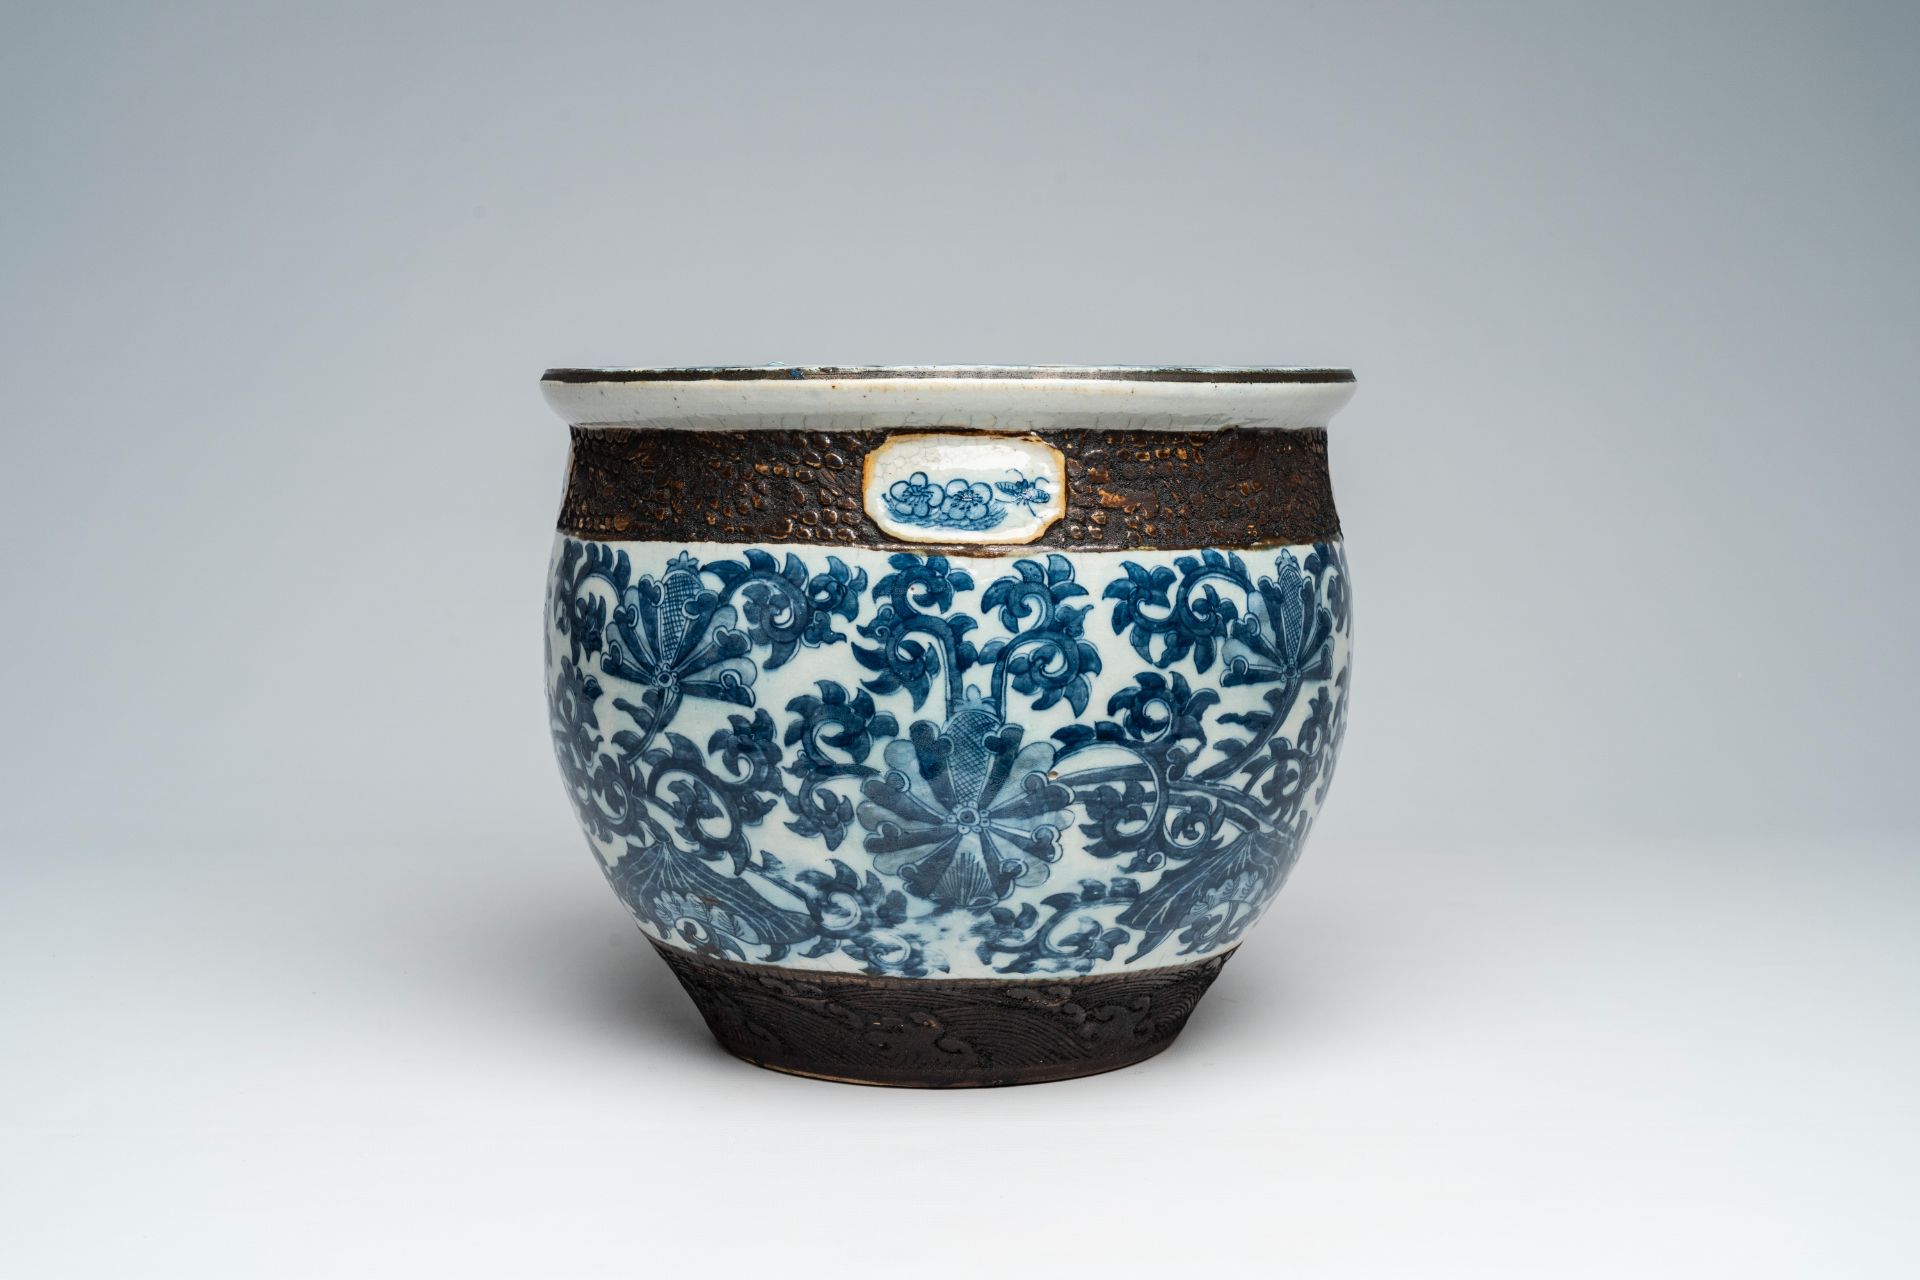 A Chinese Nanking craquelÃ© blue and white jardiniÃ¨re with floral design, 19th C. - Image 3 of 7